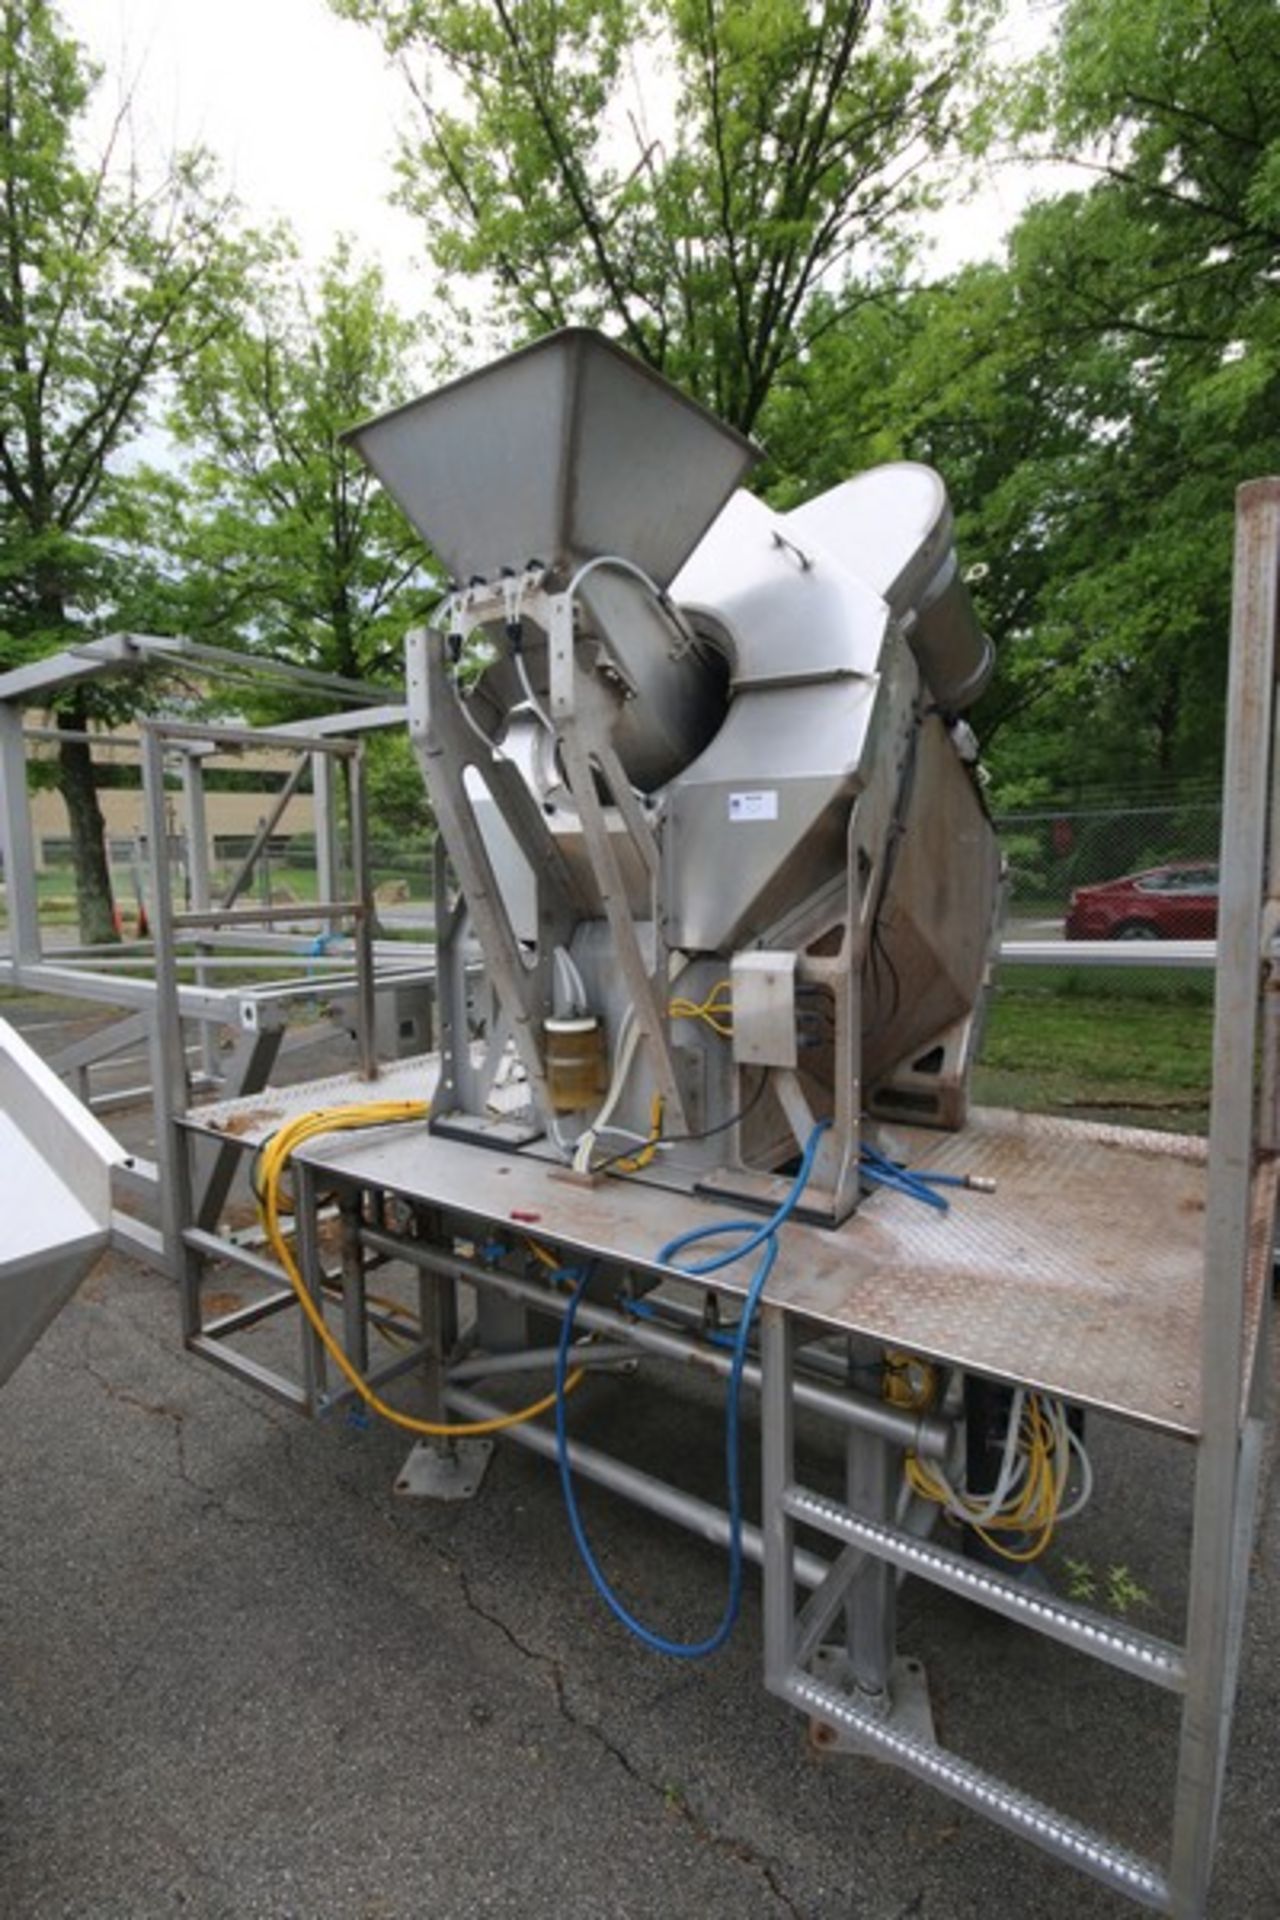 HMI S/S Spin Dryer,M/N AB-100 SPINDRYER, S/N 17035-2, with Baldor 10 ho S/S Clad Motor, Mounted on - Image 7 of 11